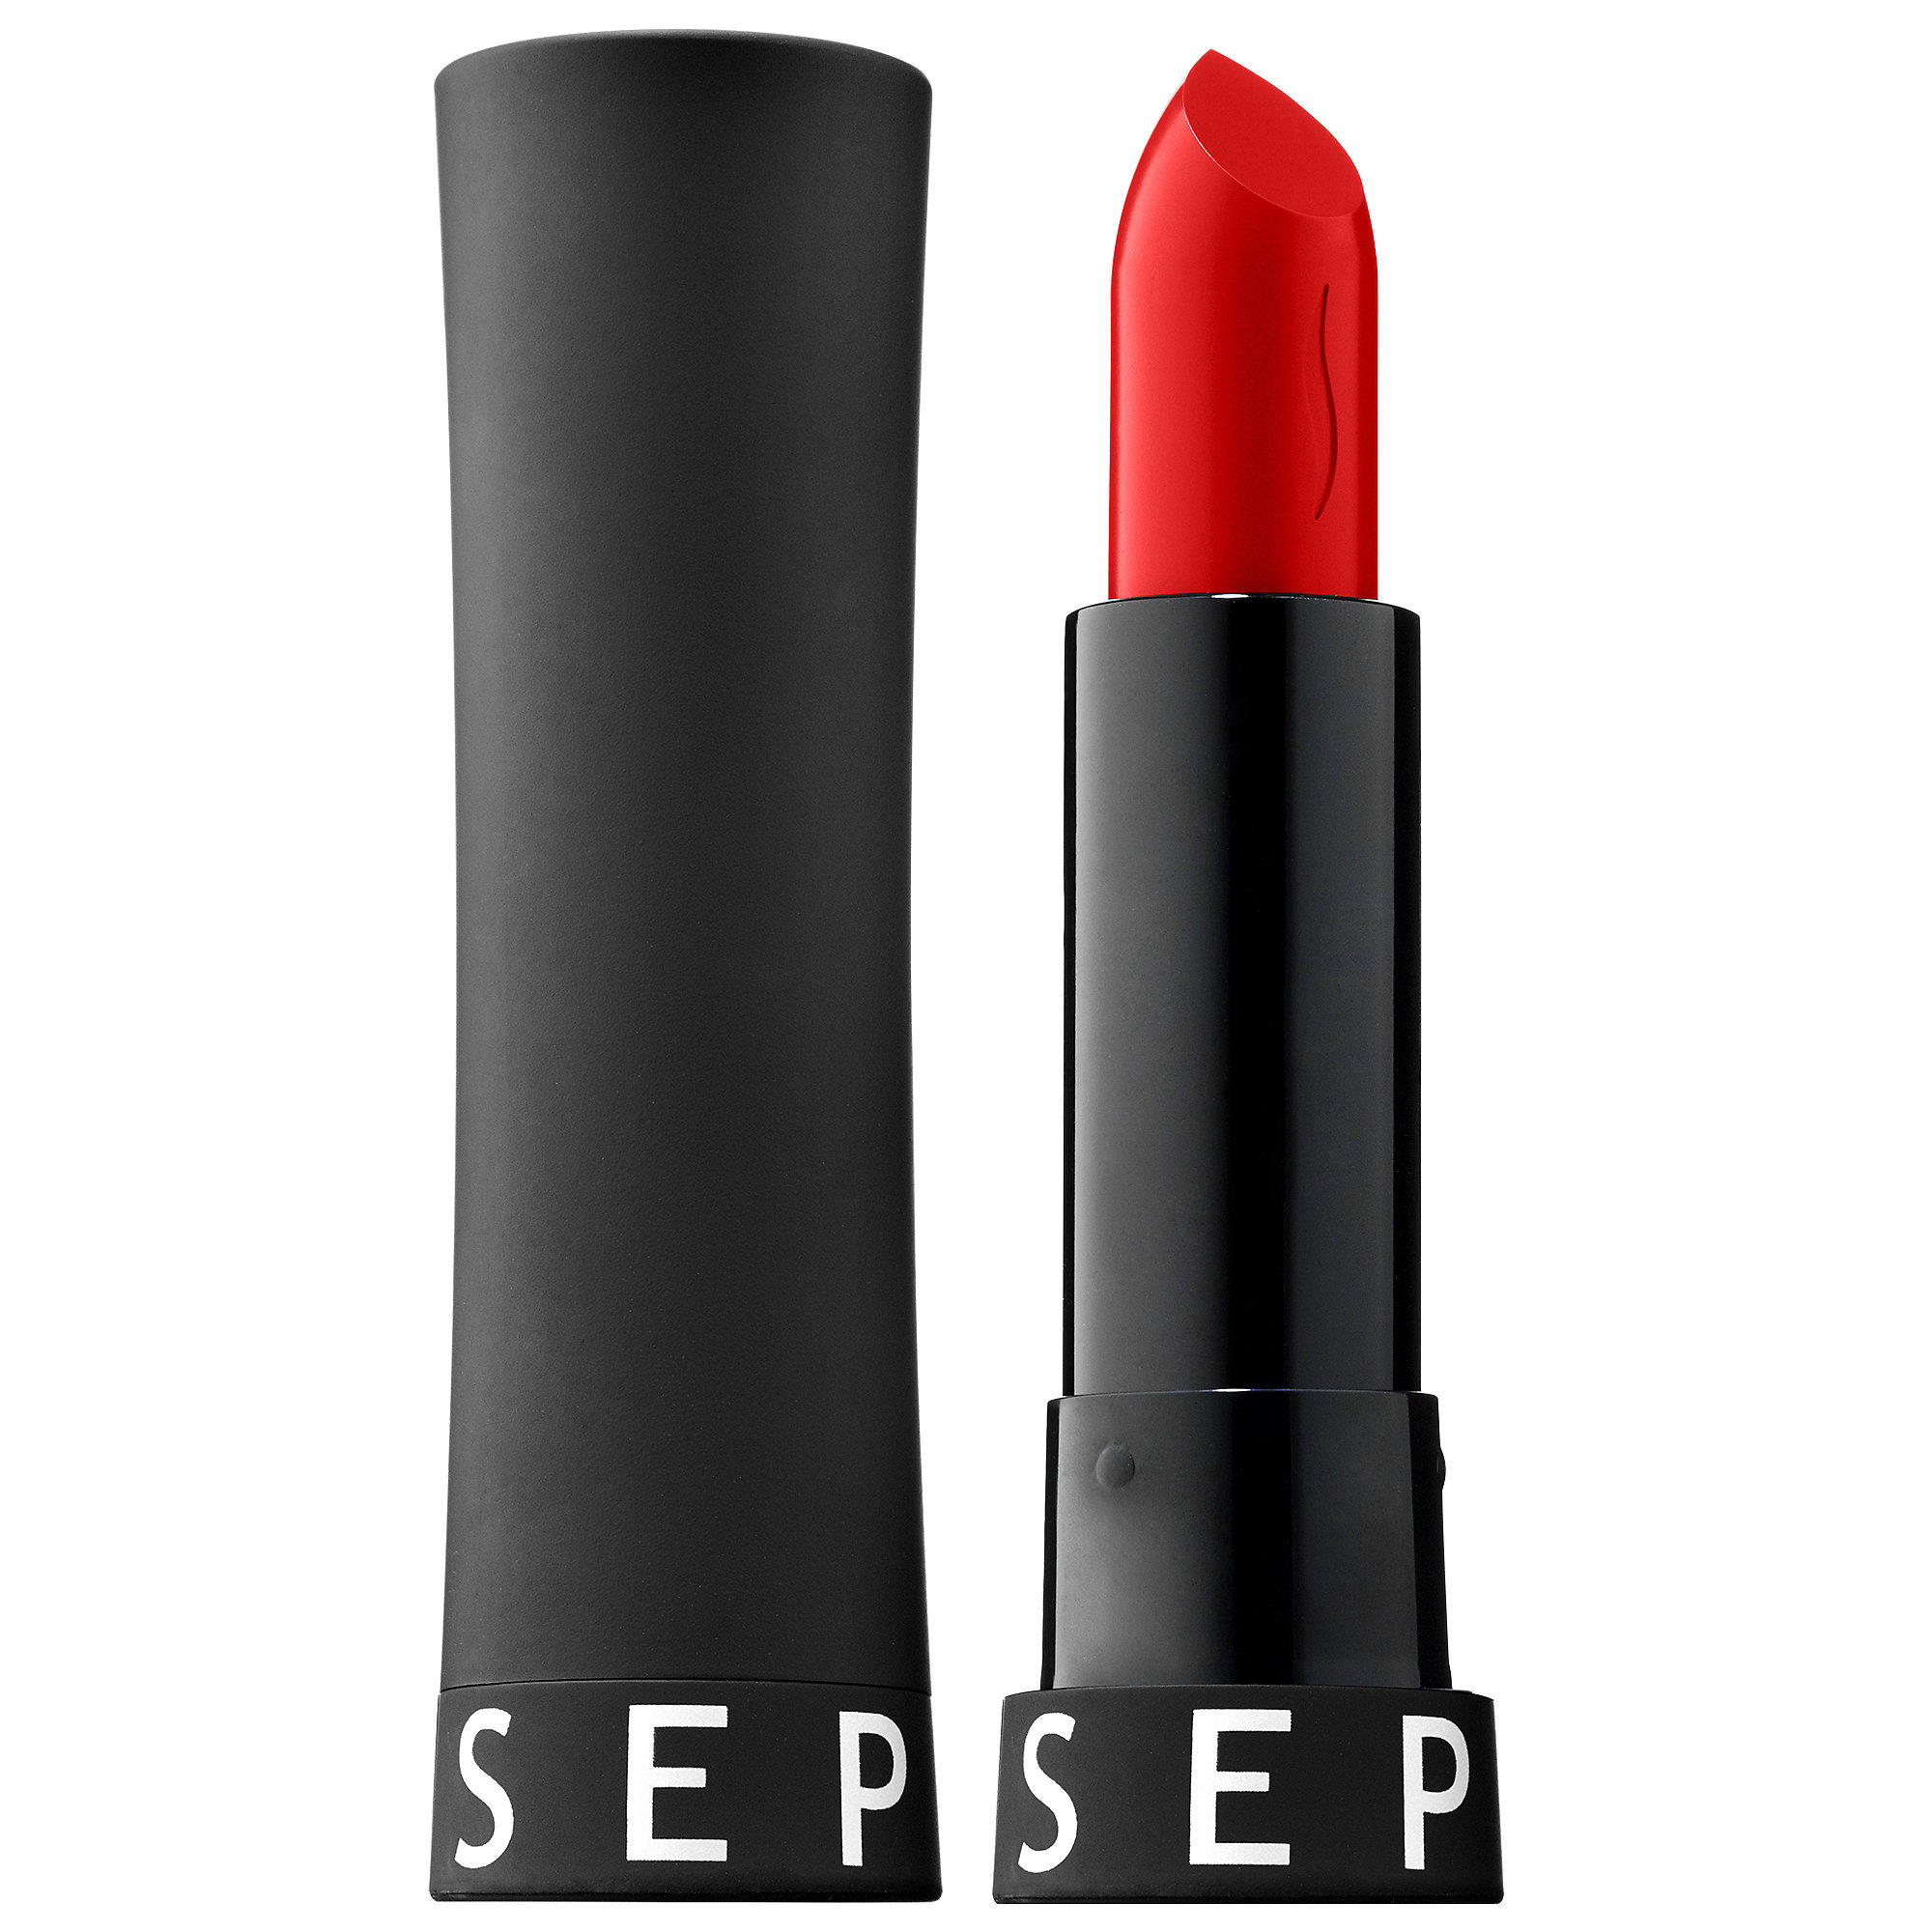 Sephora Rouge Lipstick The Red Best deals on Sephora